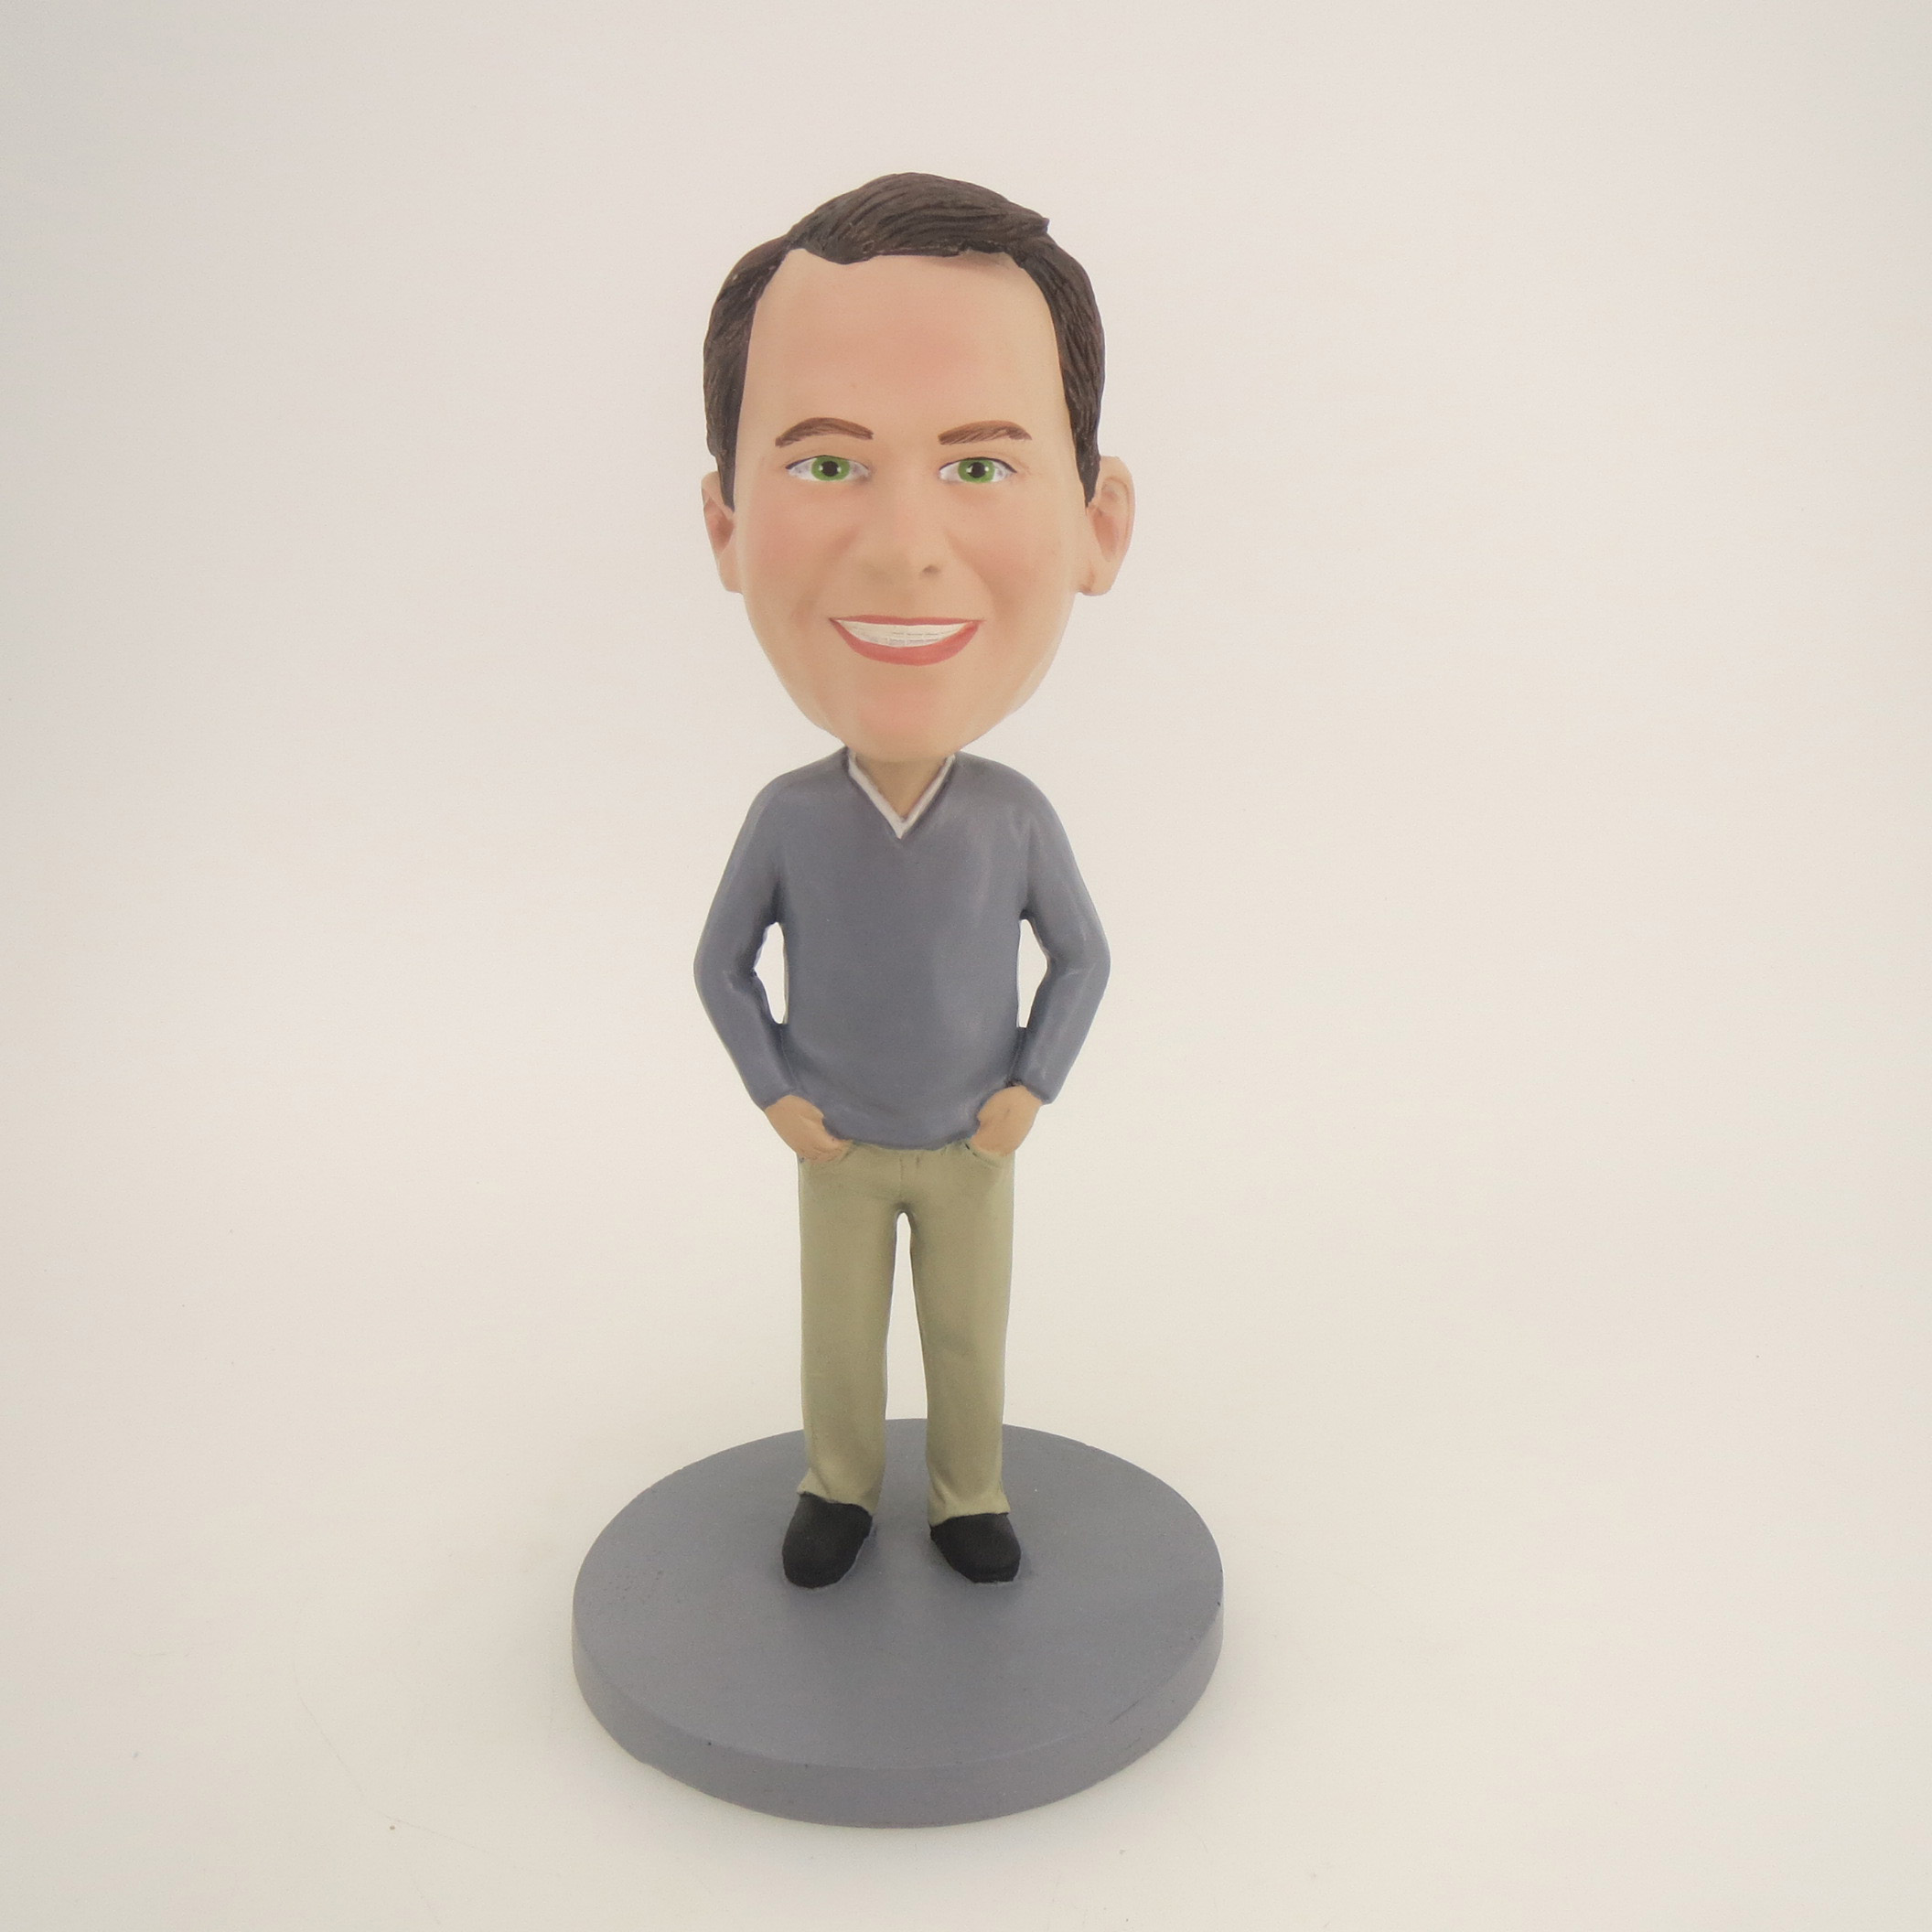 Picture of Custom Bobblehead Doll: Casual Man With Nice Smiling